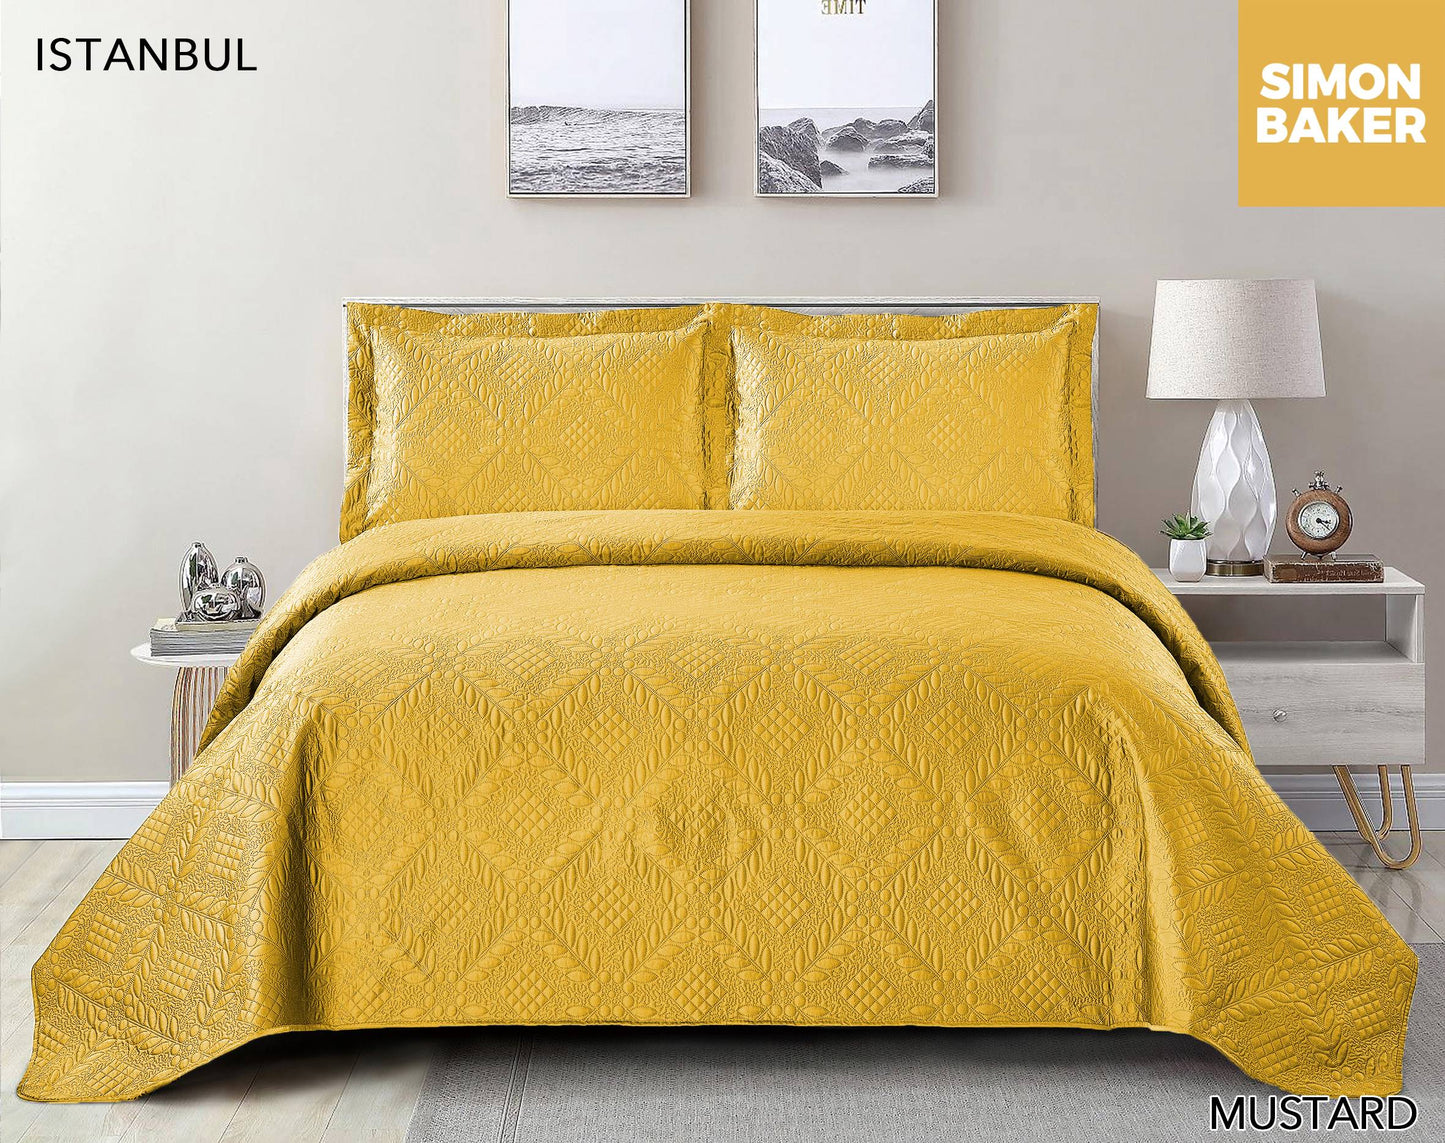 Istanbul Pin-Quilt Bedspread